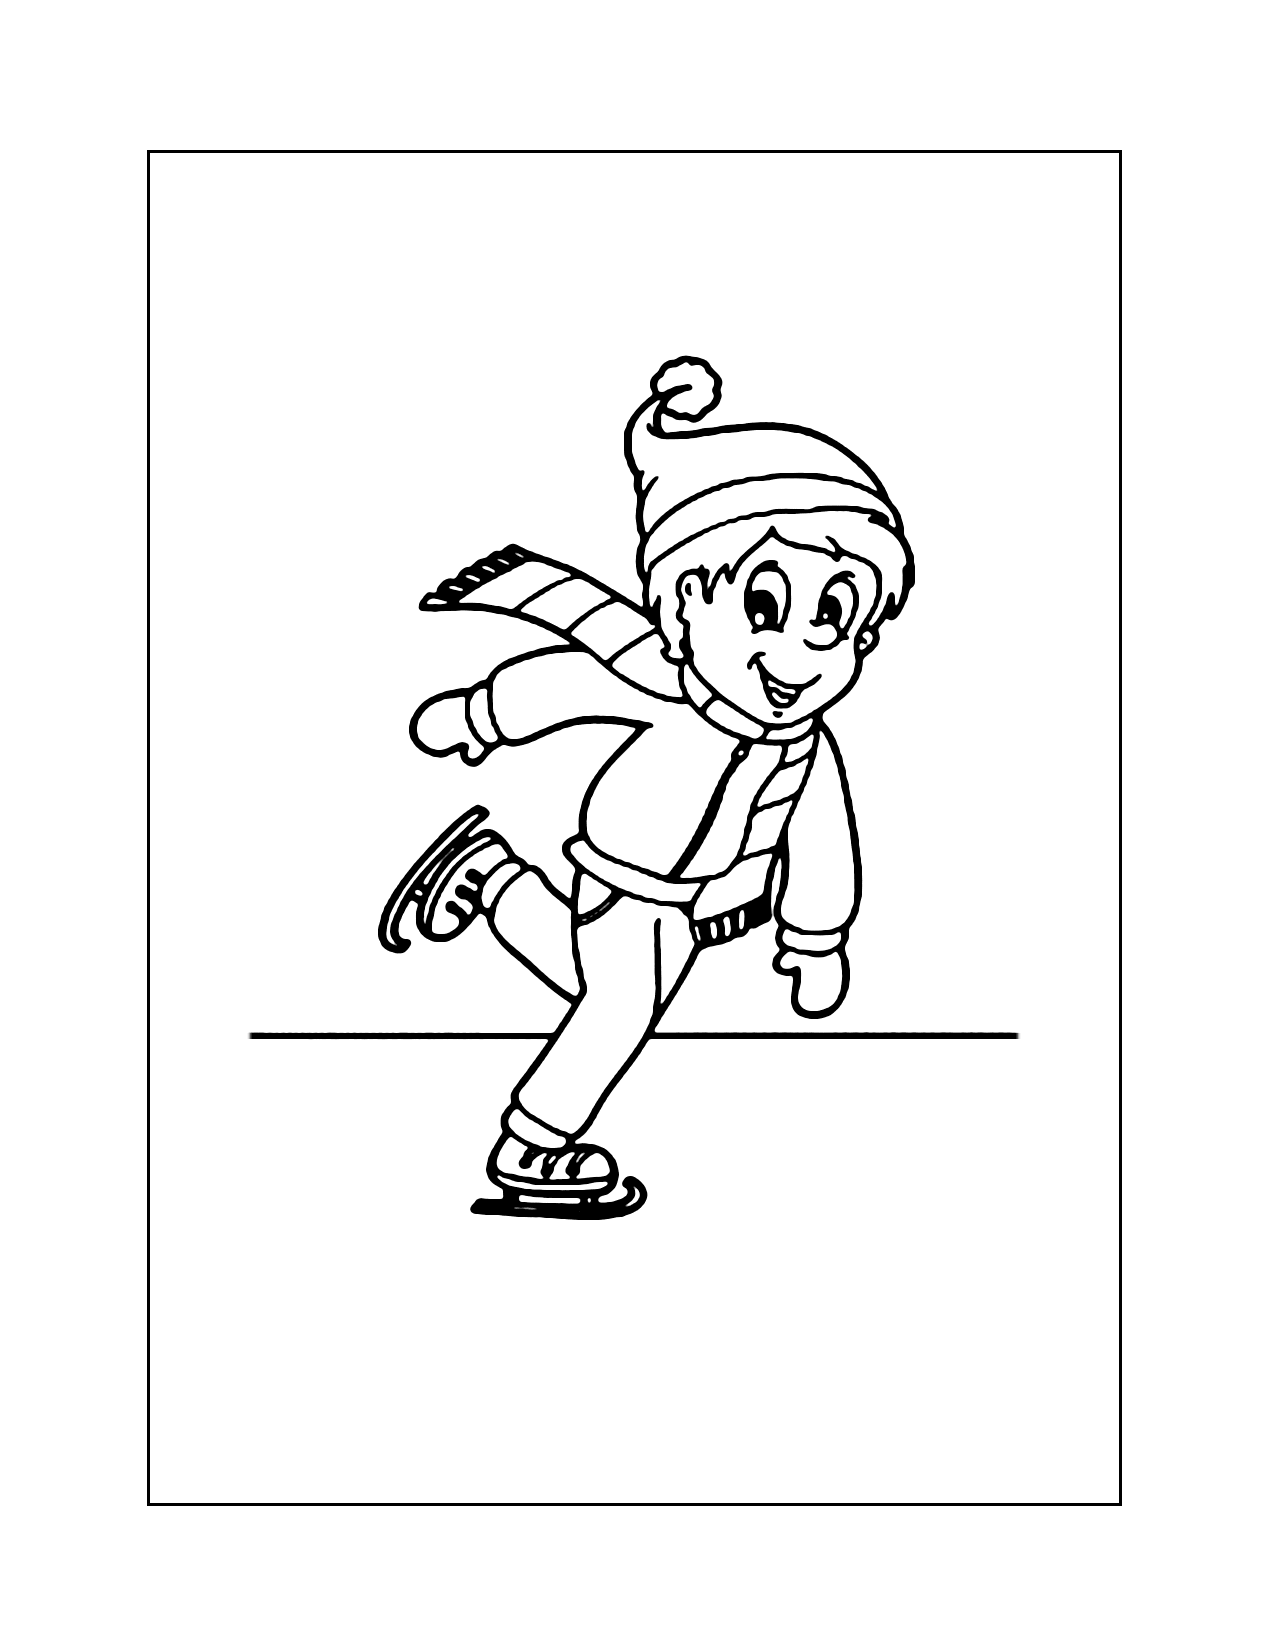 Boy Speed Skating Coloring Page